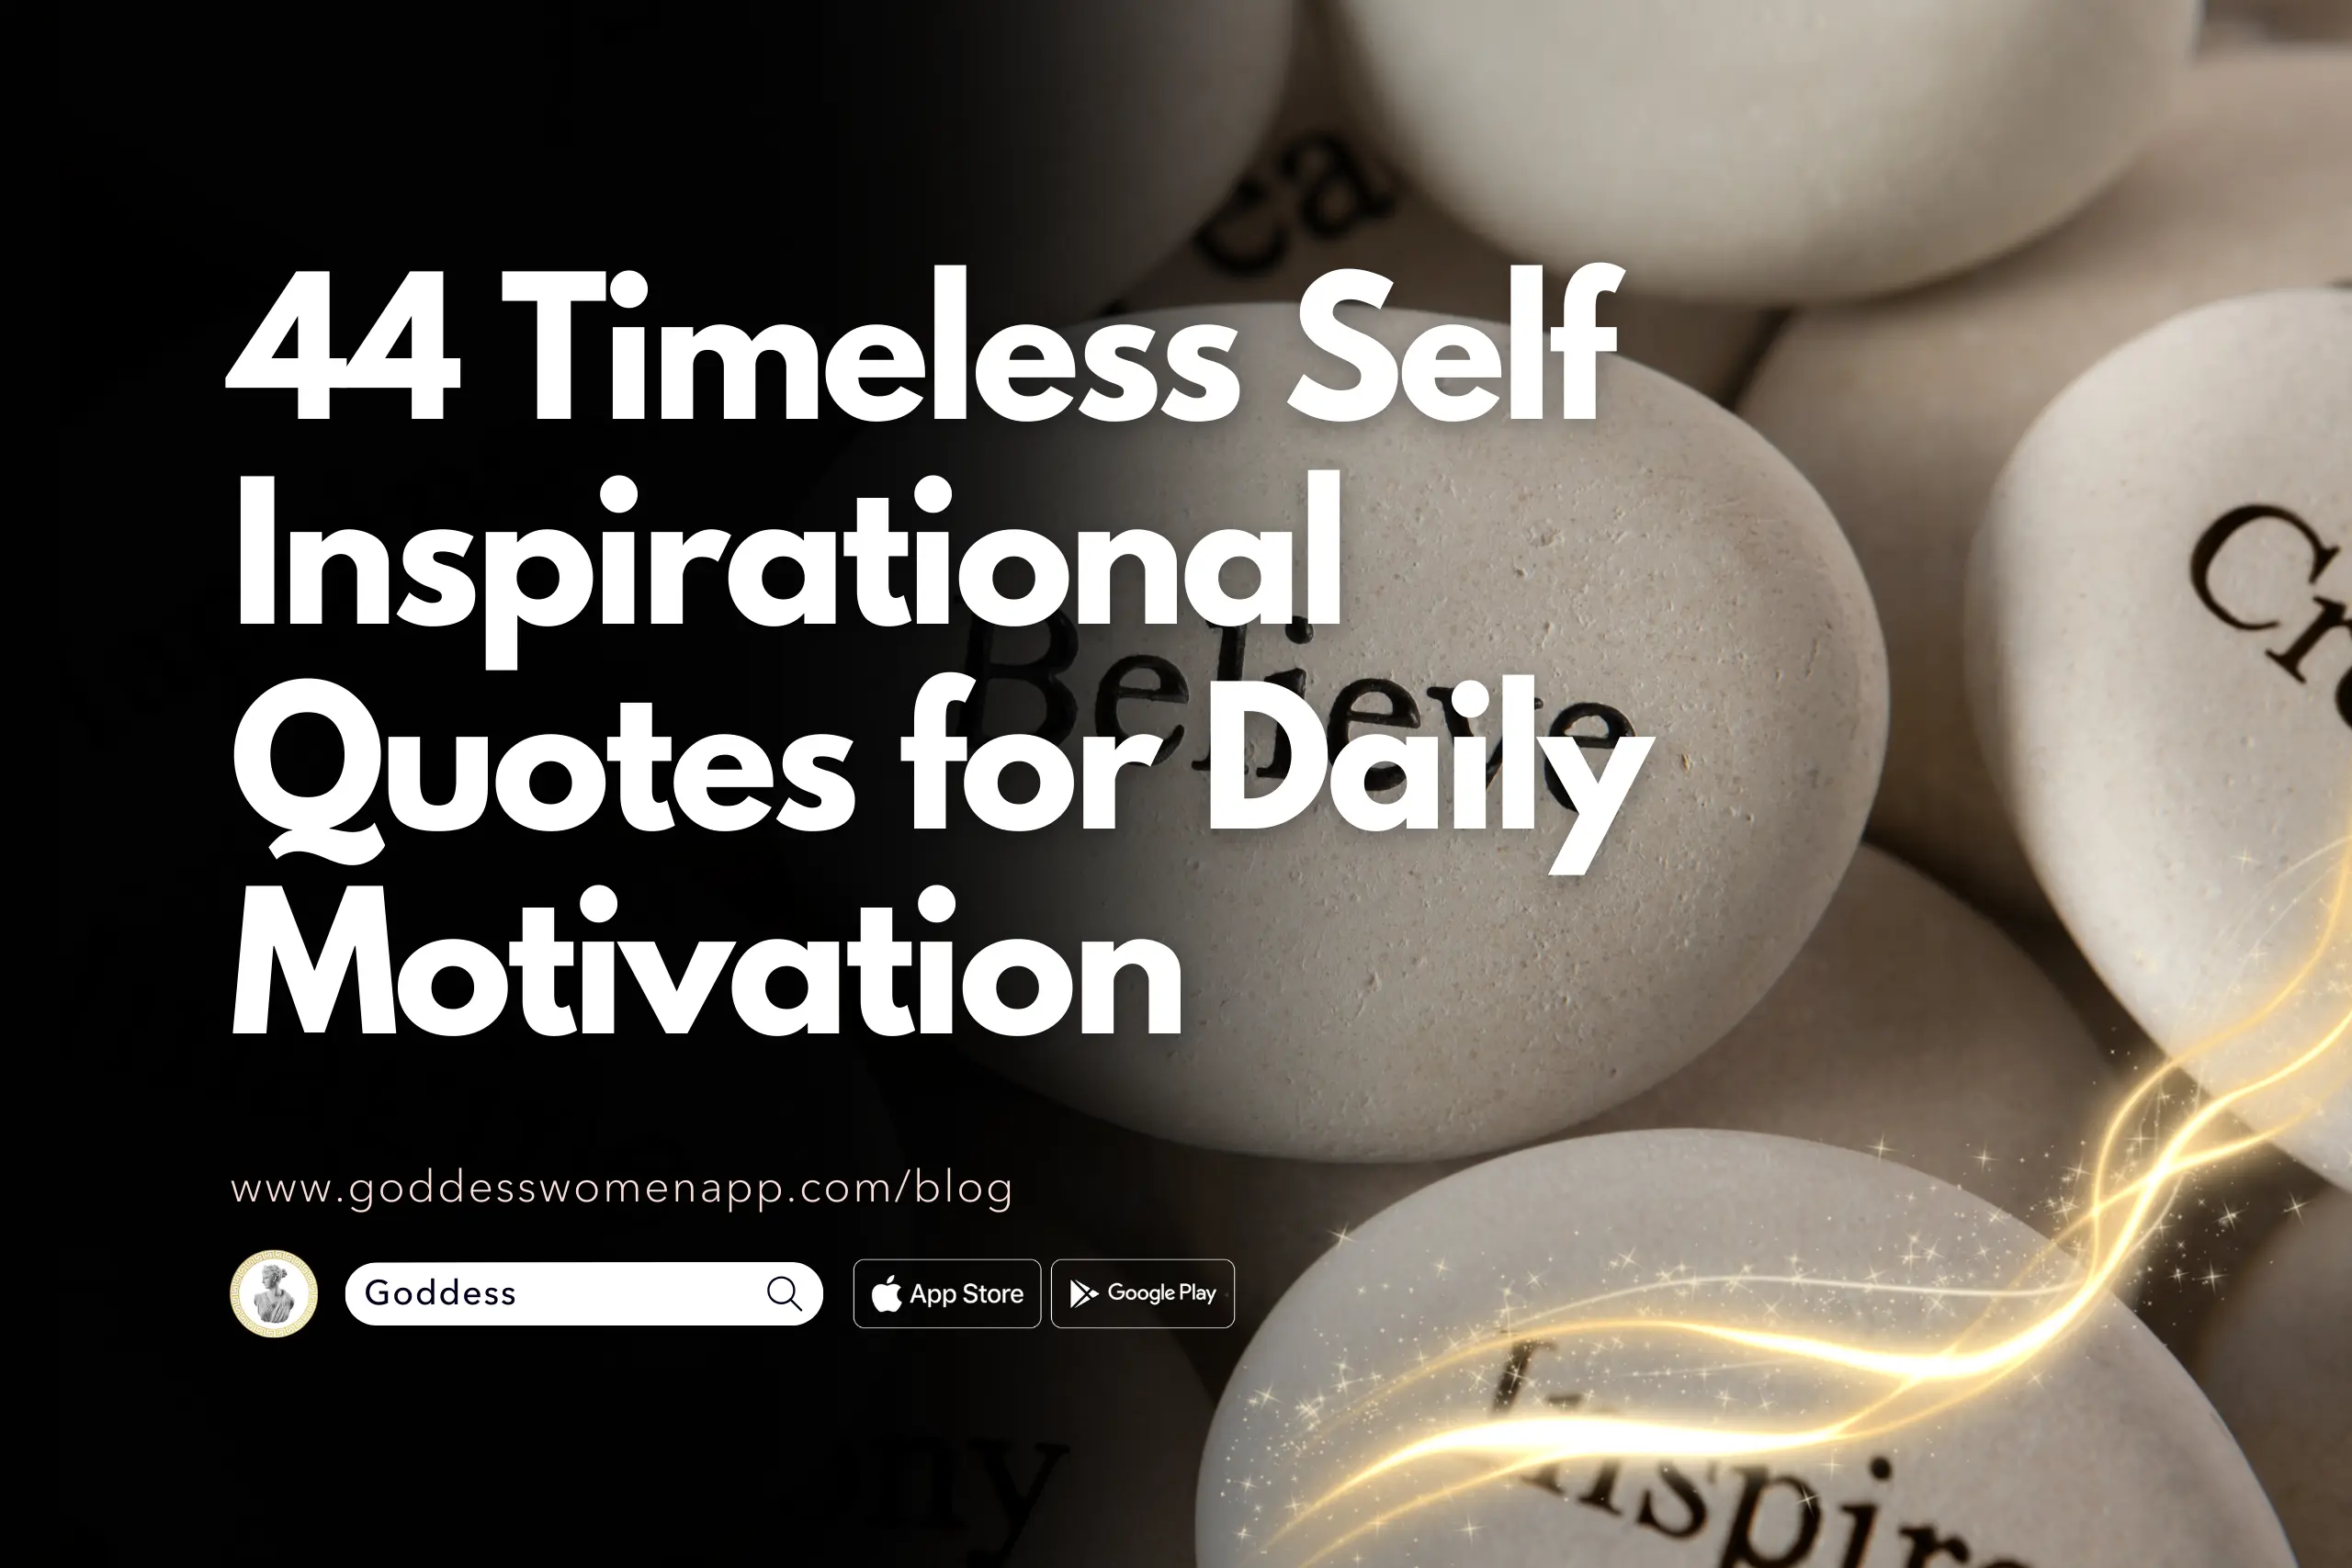 44 Timeless Self Inspirational Quotes for Daily Motivation